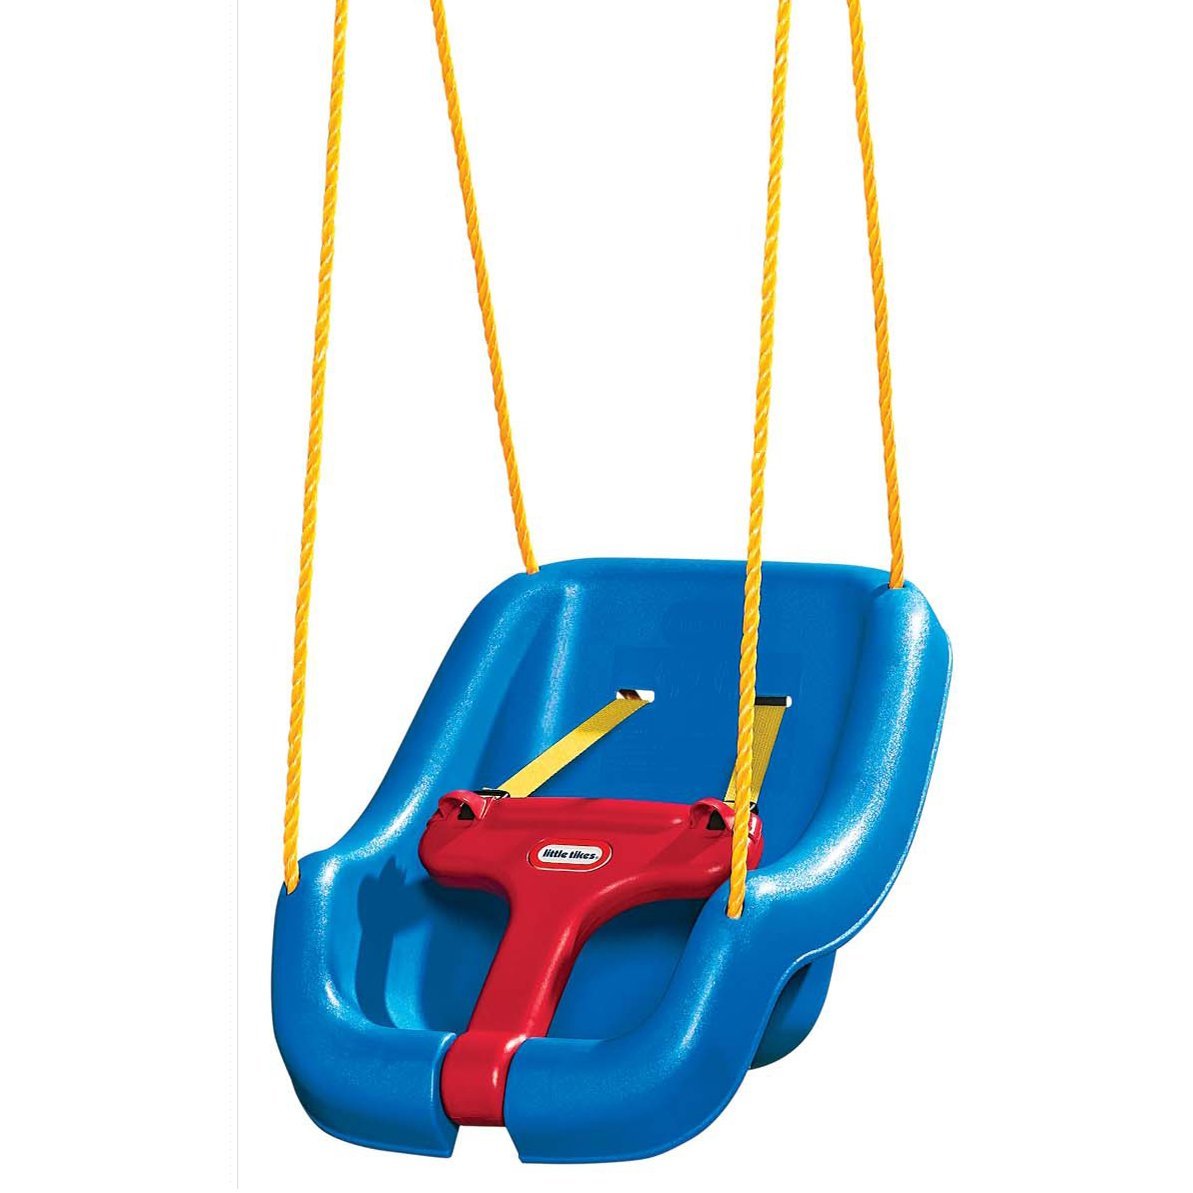 Little Tikes 2-in-1 Snug 'n Secure Blue Swing With Adjustable Strap, Indoor and Outdoor Playing Time, Perfect For Baby and Toddler Swing-Set | Boys and Girls 9 Months - 4 Years of Age